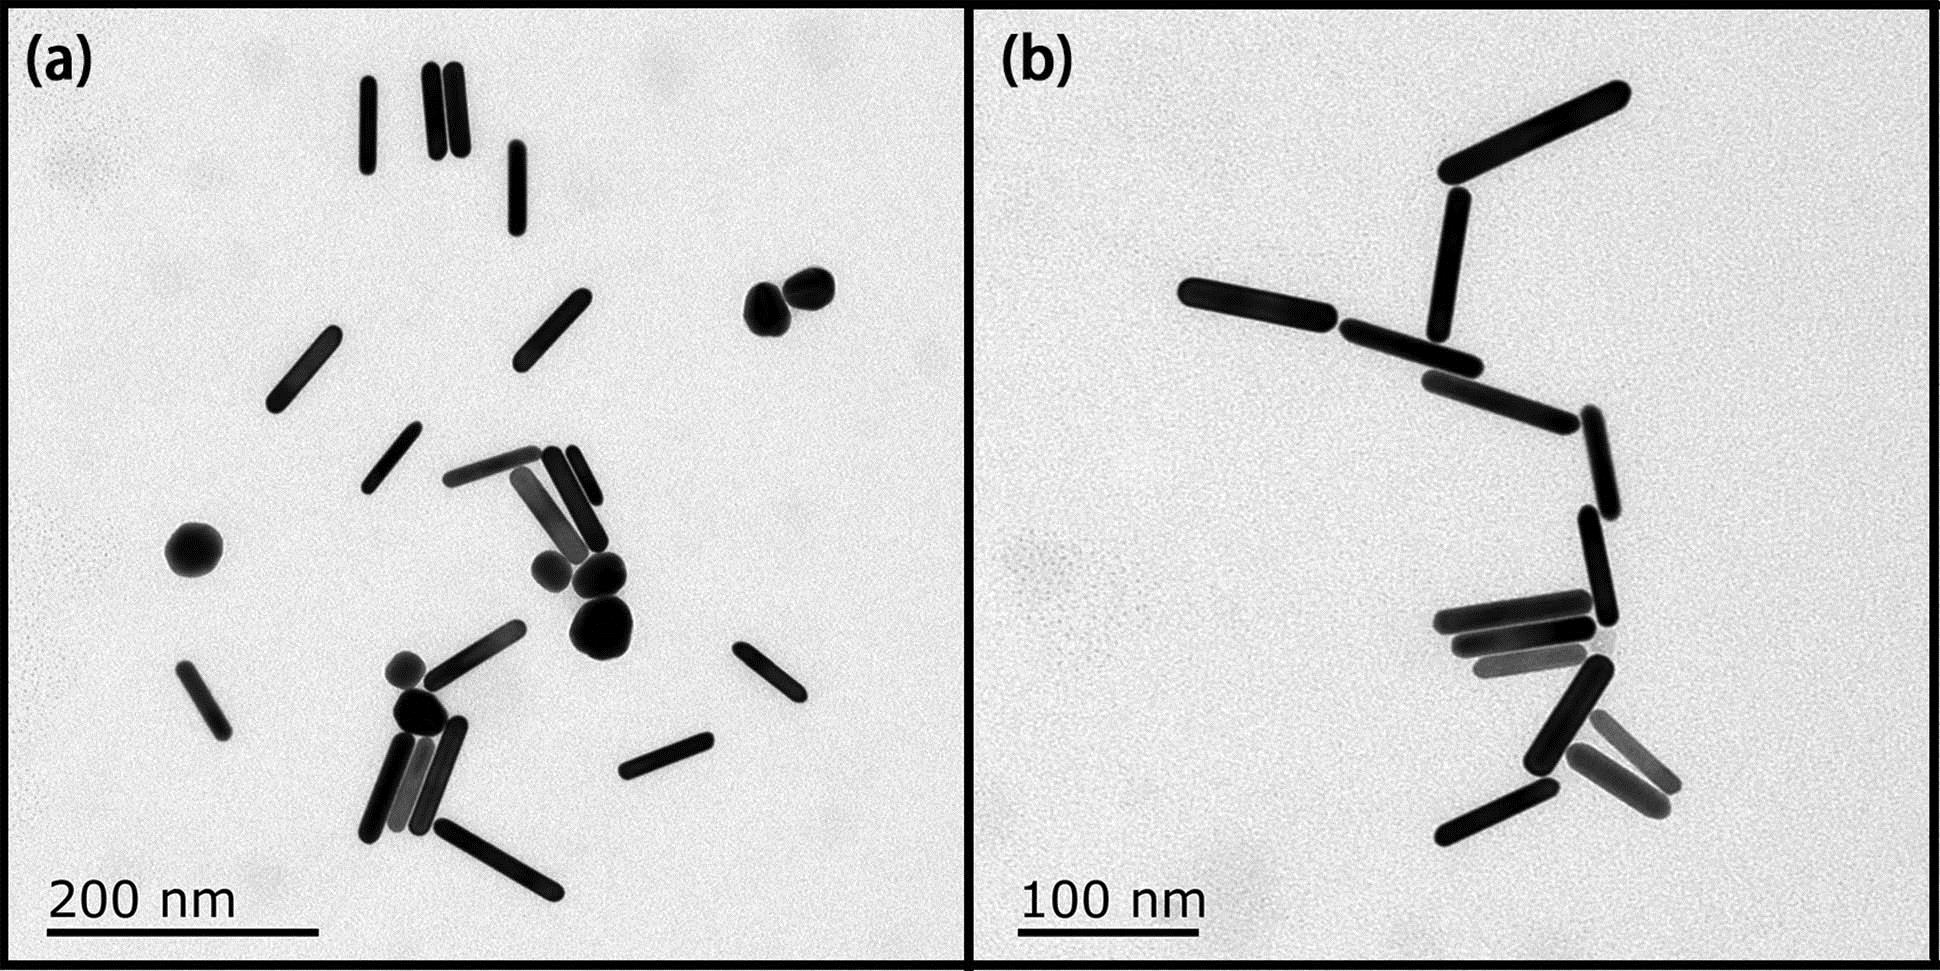 TEM images of GNRs with the scale bars of (a) 200 and (b) 100 nm.